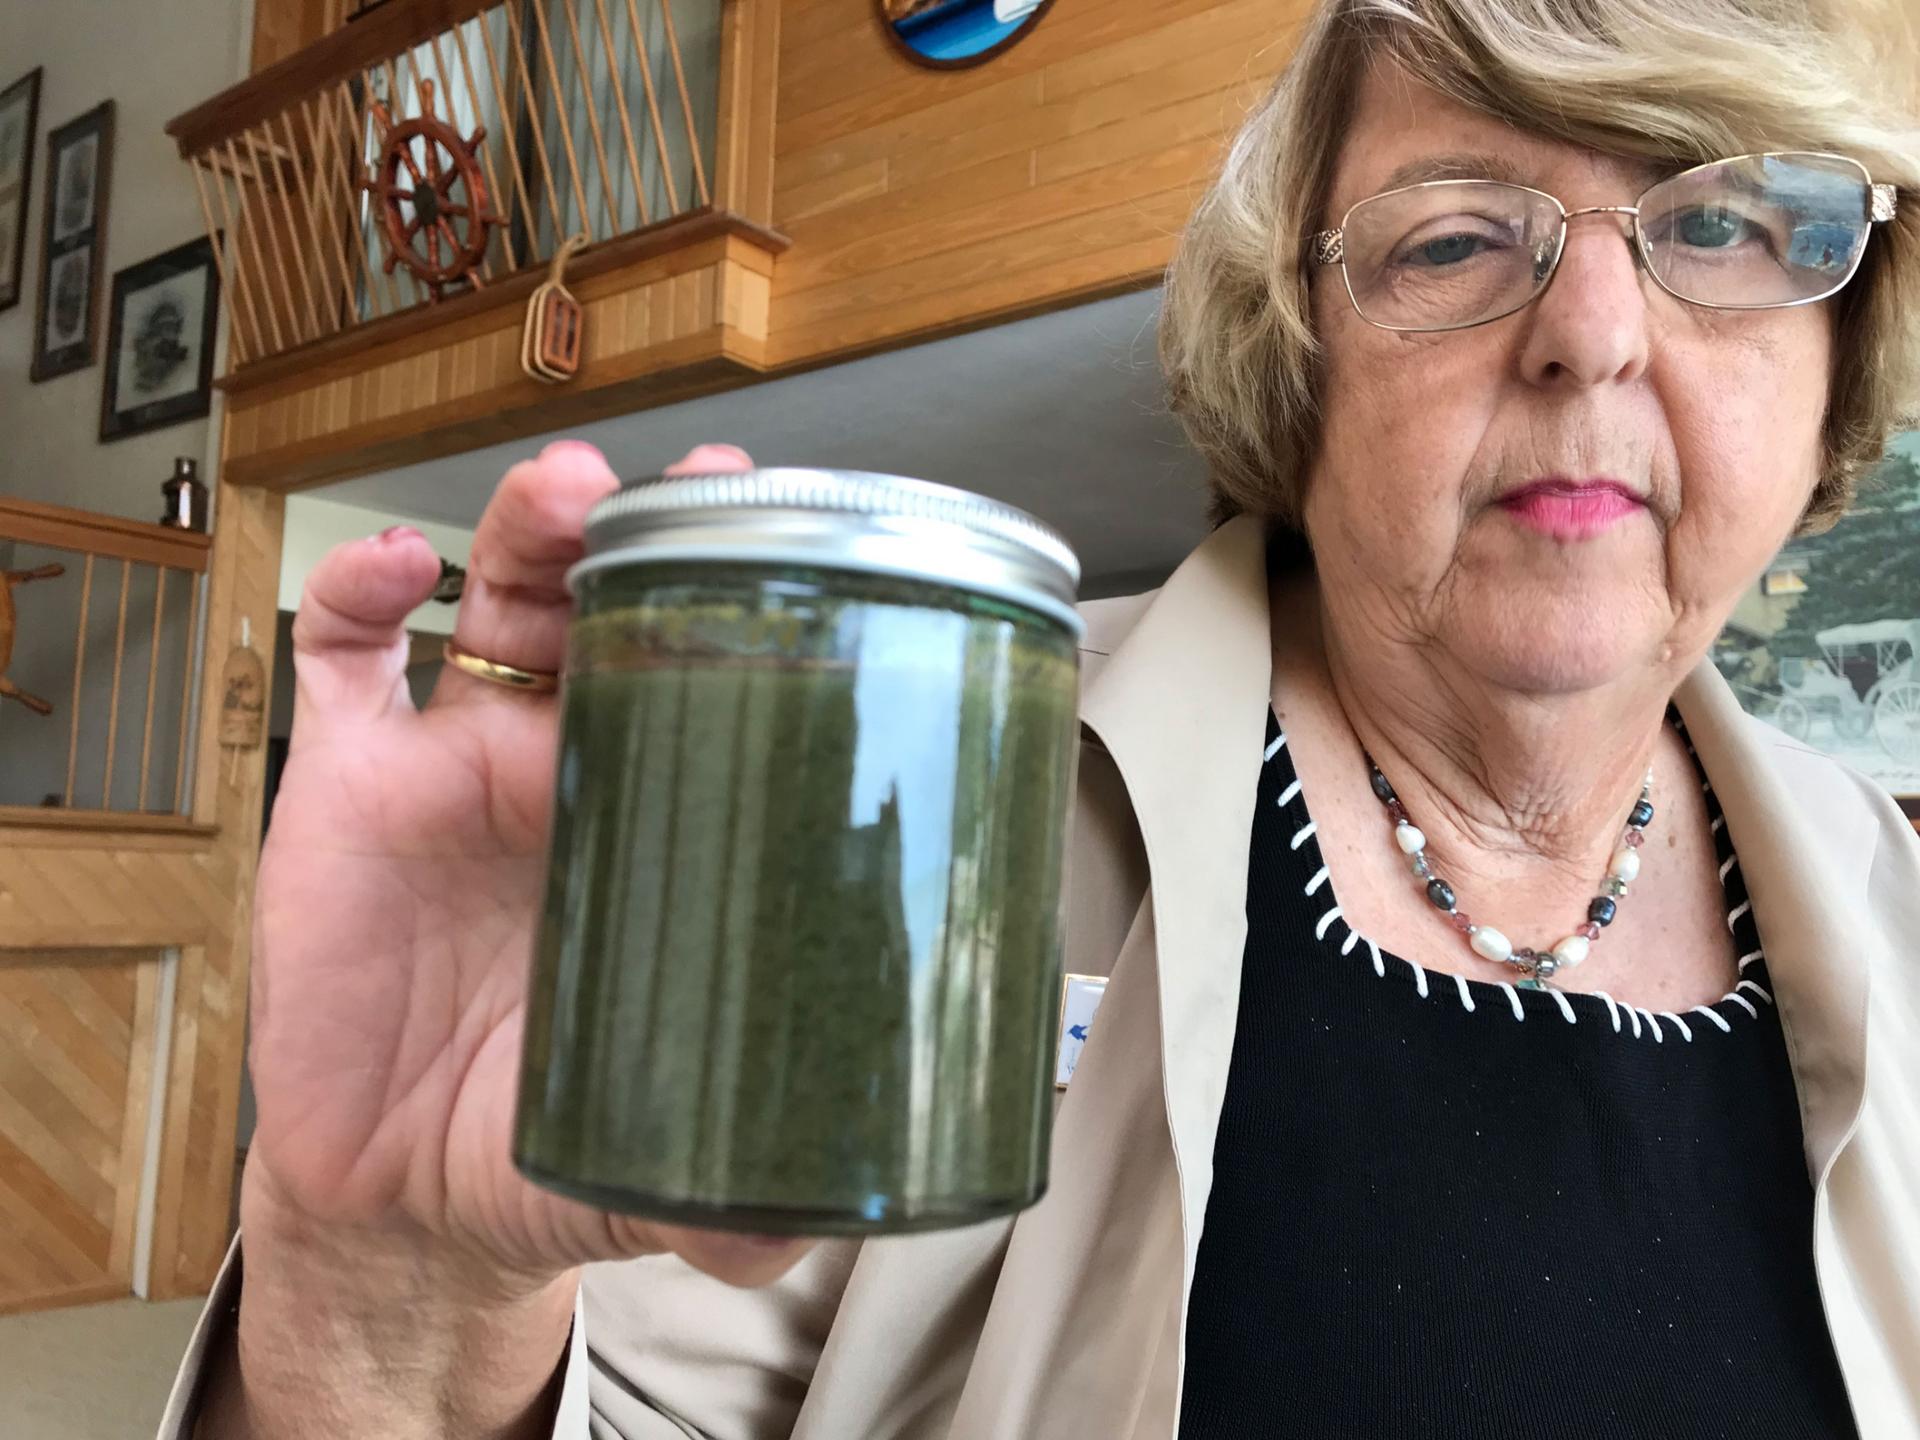 A woman is shown holding a glass jar and metal top filled with green algae water.